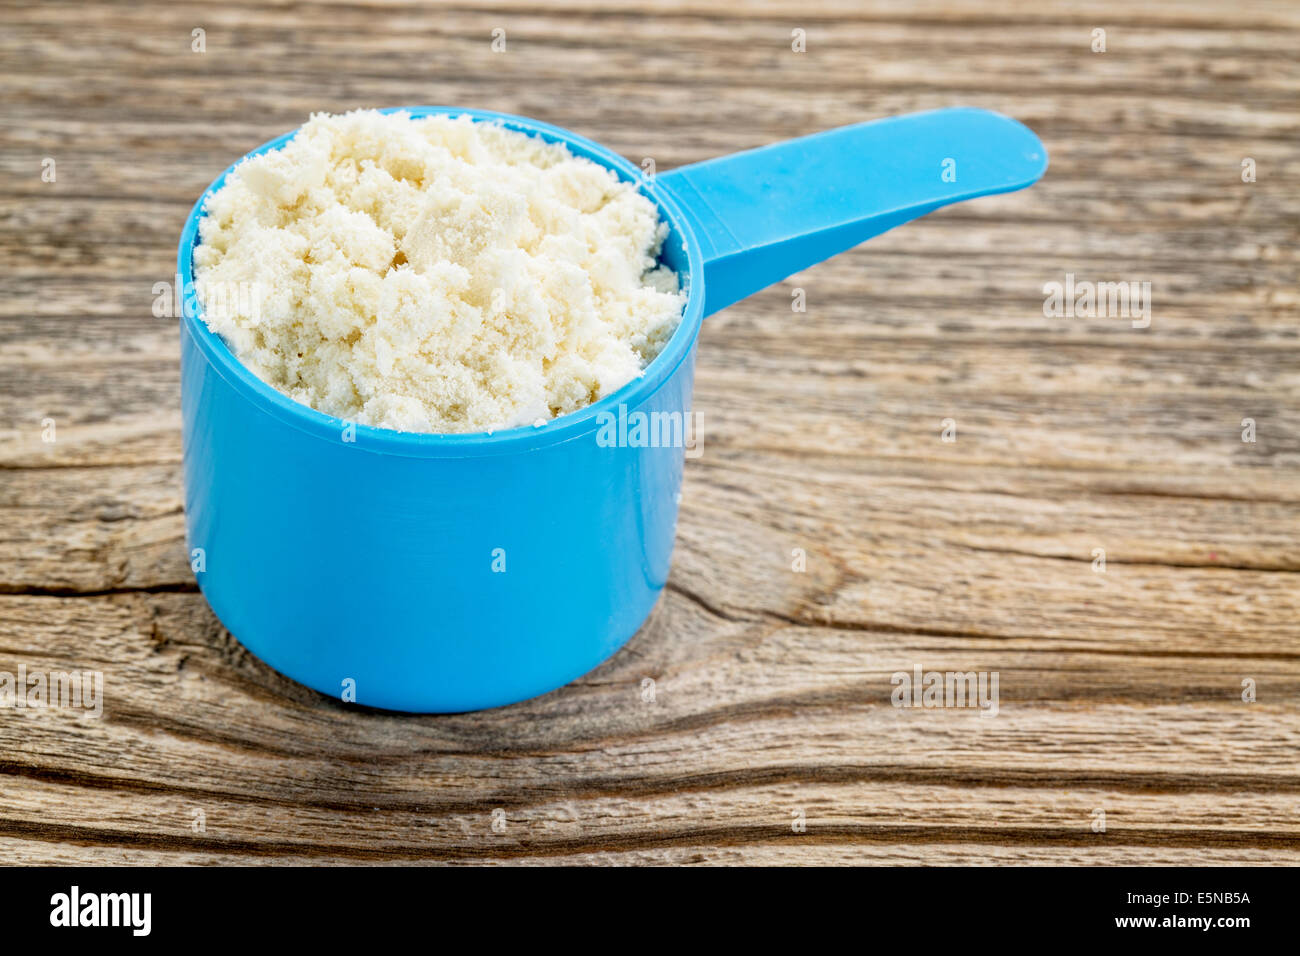 https://c8.alamy.com/comp/E5NB5A/whey-protein-powder-in-a-blue-plastic-measuring-scoop-against-grained-E5NB5A.jpg